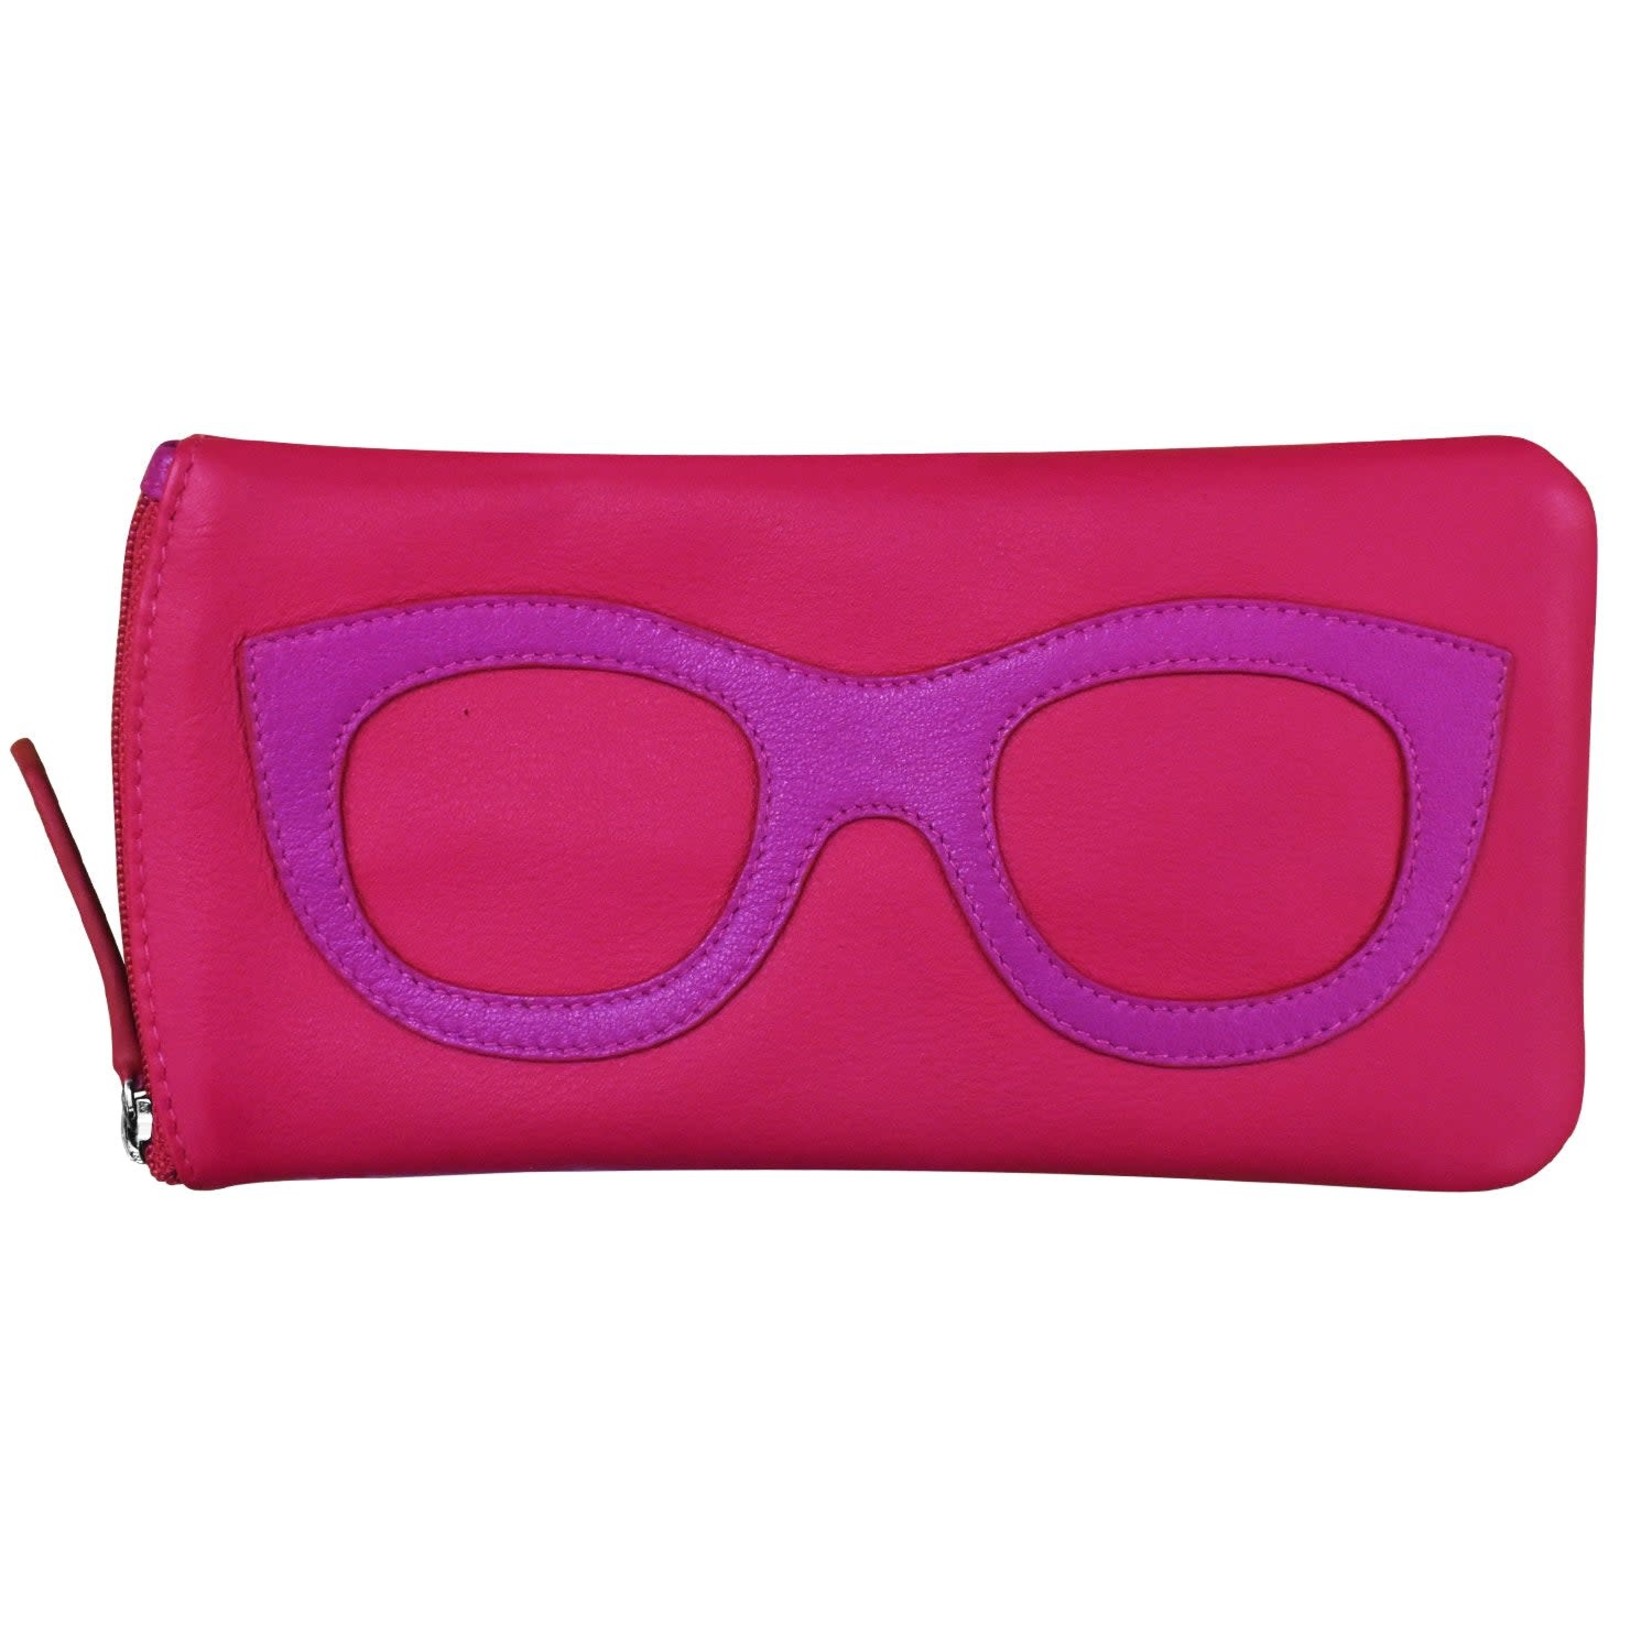 Leather Handbags and Accessories 6462 Indian Pink/Orchid - Leather Eyeglass Case